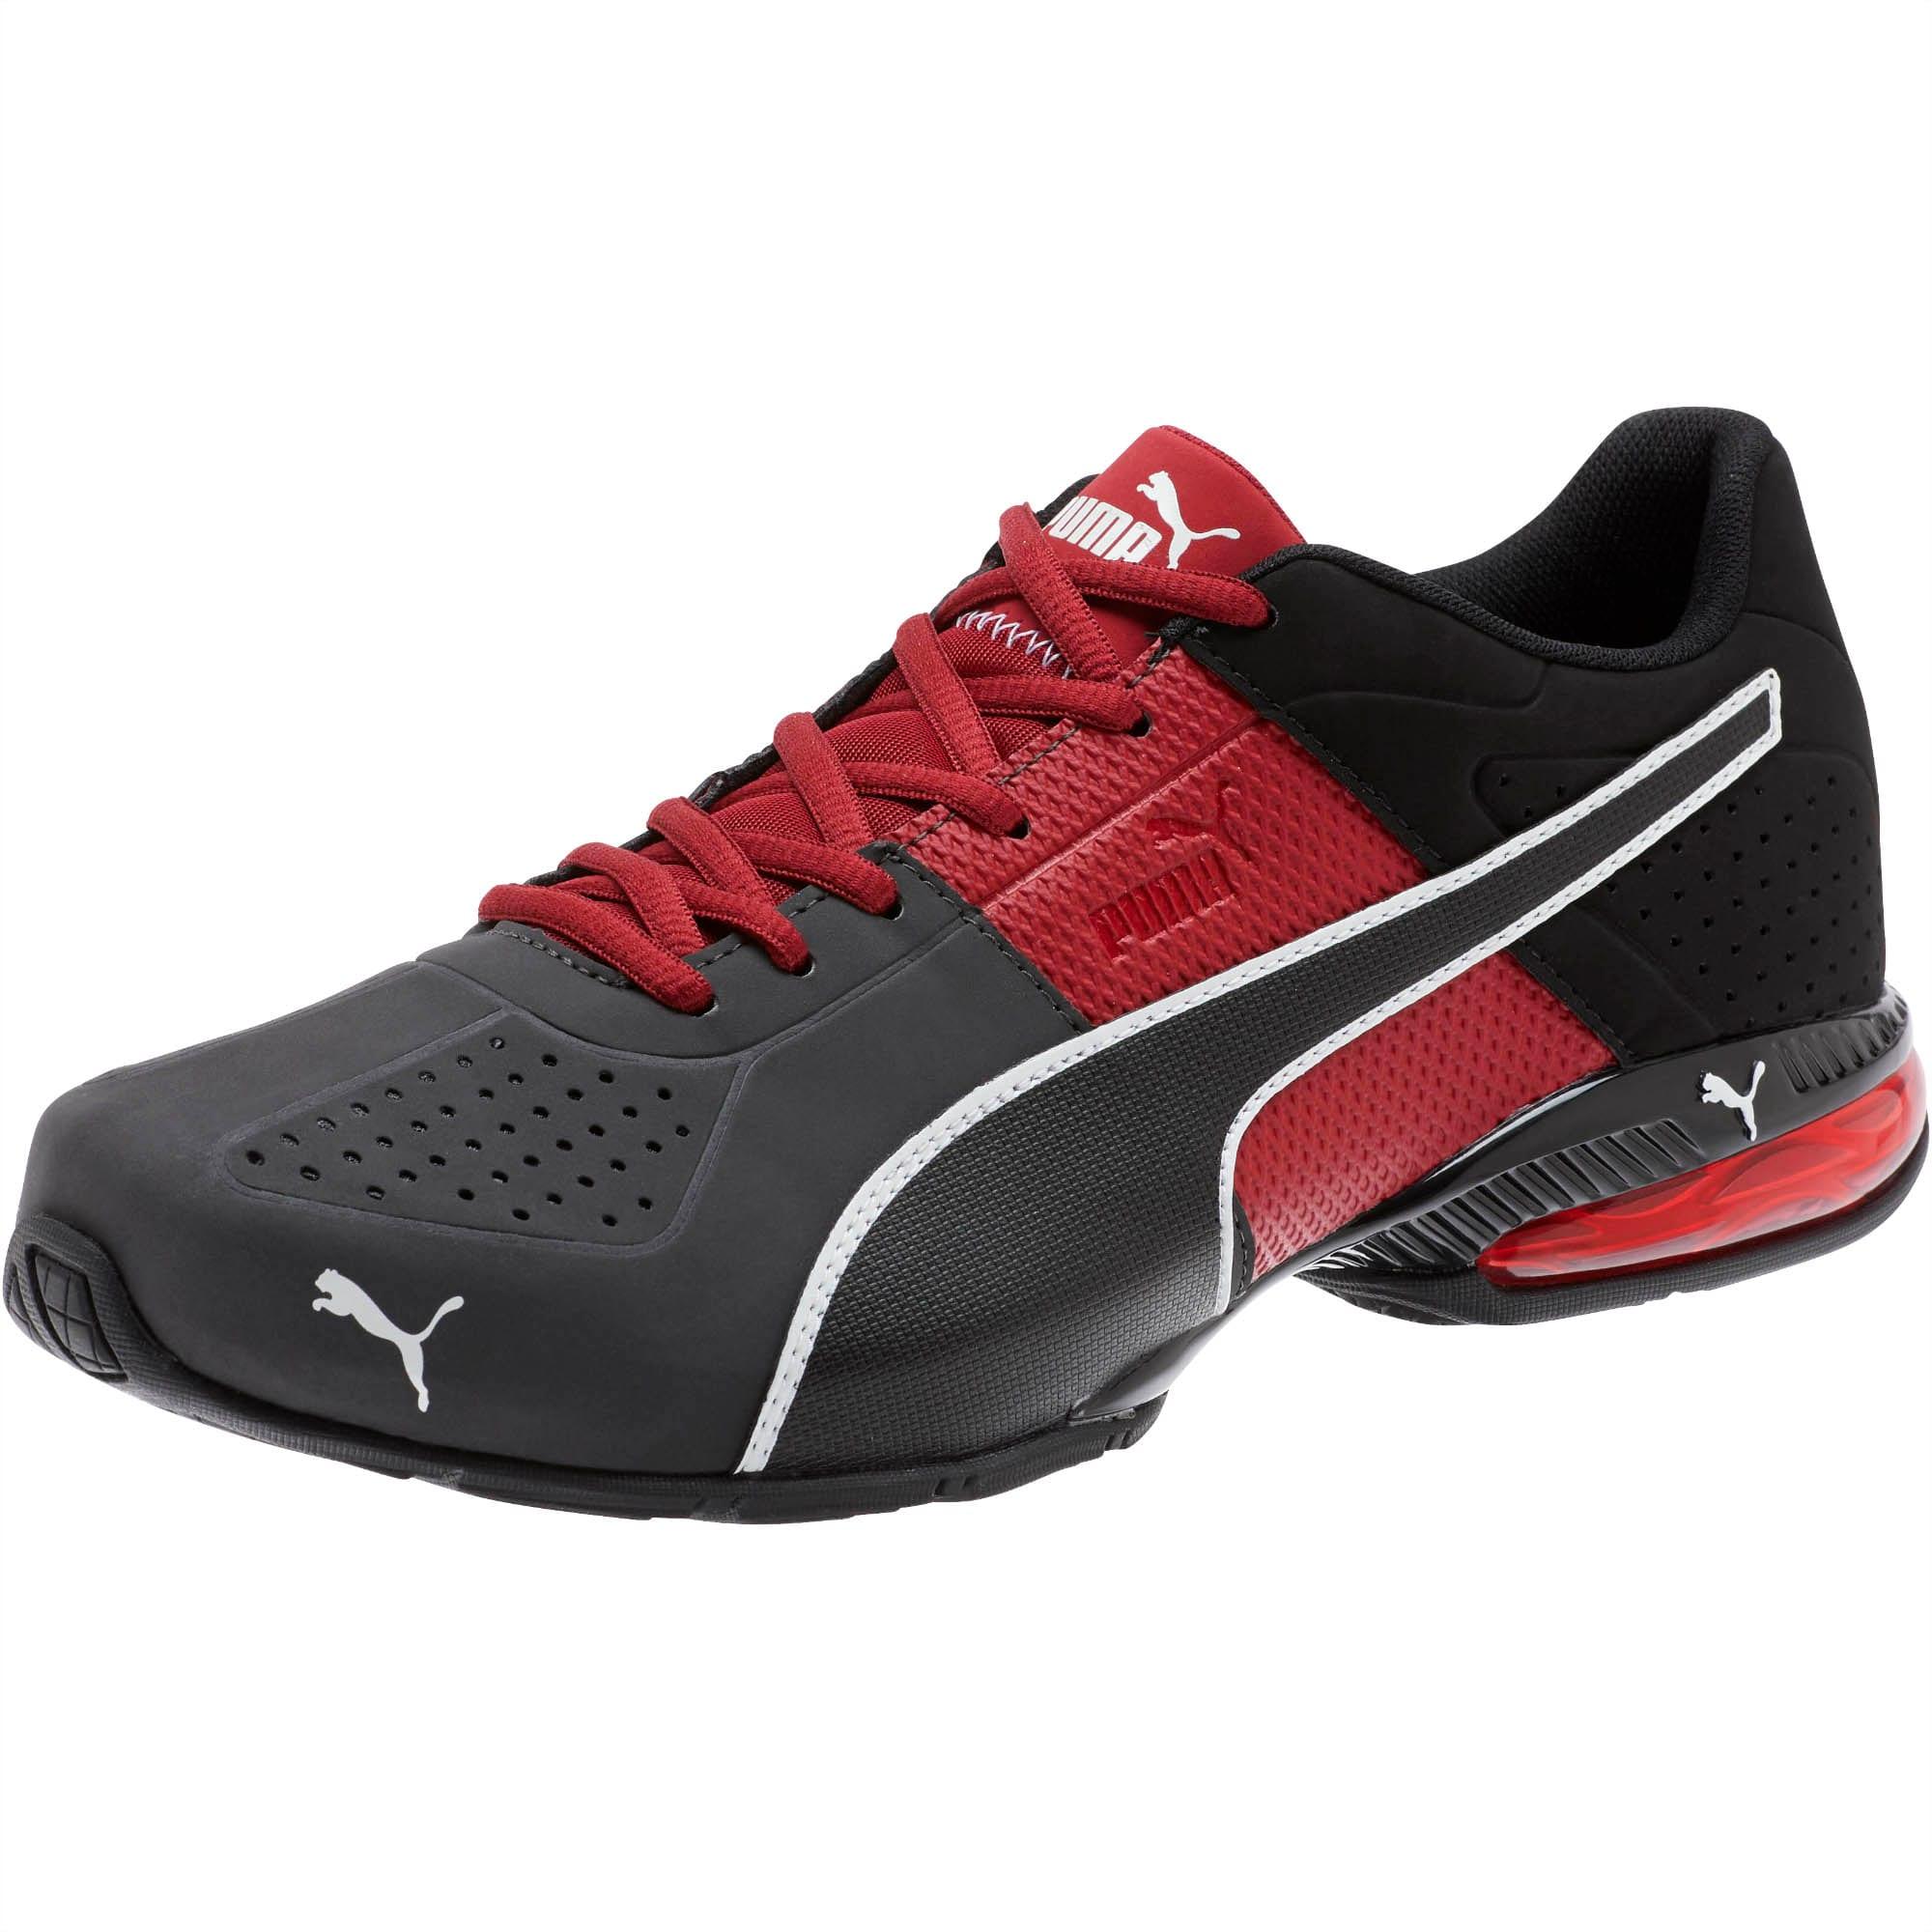 PUMA Lace Cell Surin 2 Matte Training Shoes in Red for Men - Lyst